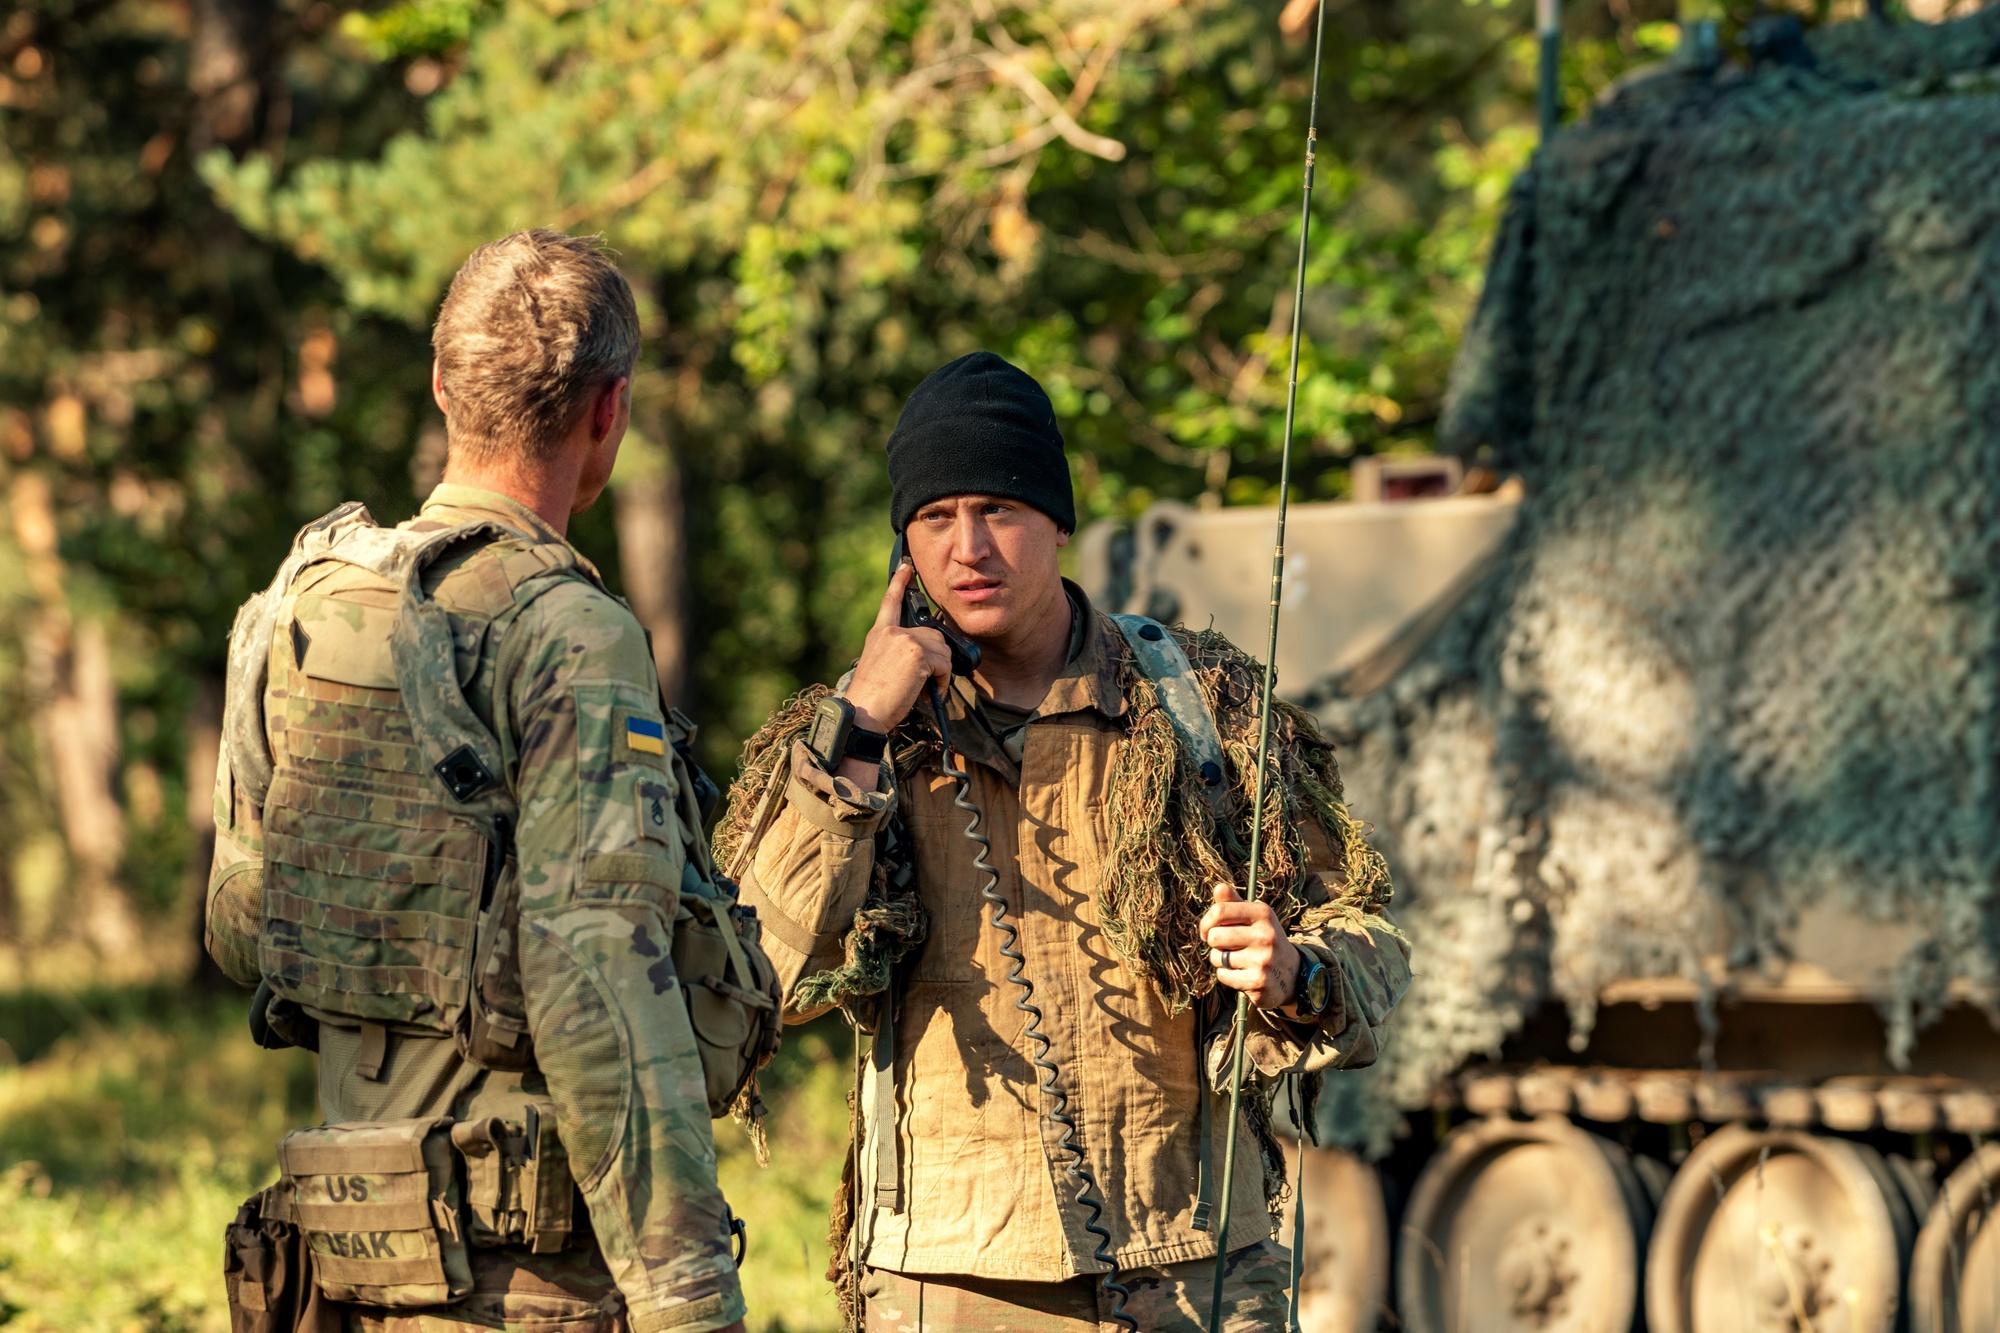 DVIDS - Images - U.S. Army Officer swaps unit patches with Polish Officer  [Image 9 of 9]